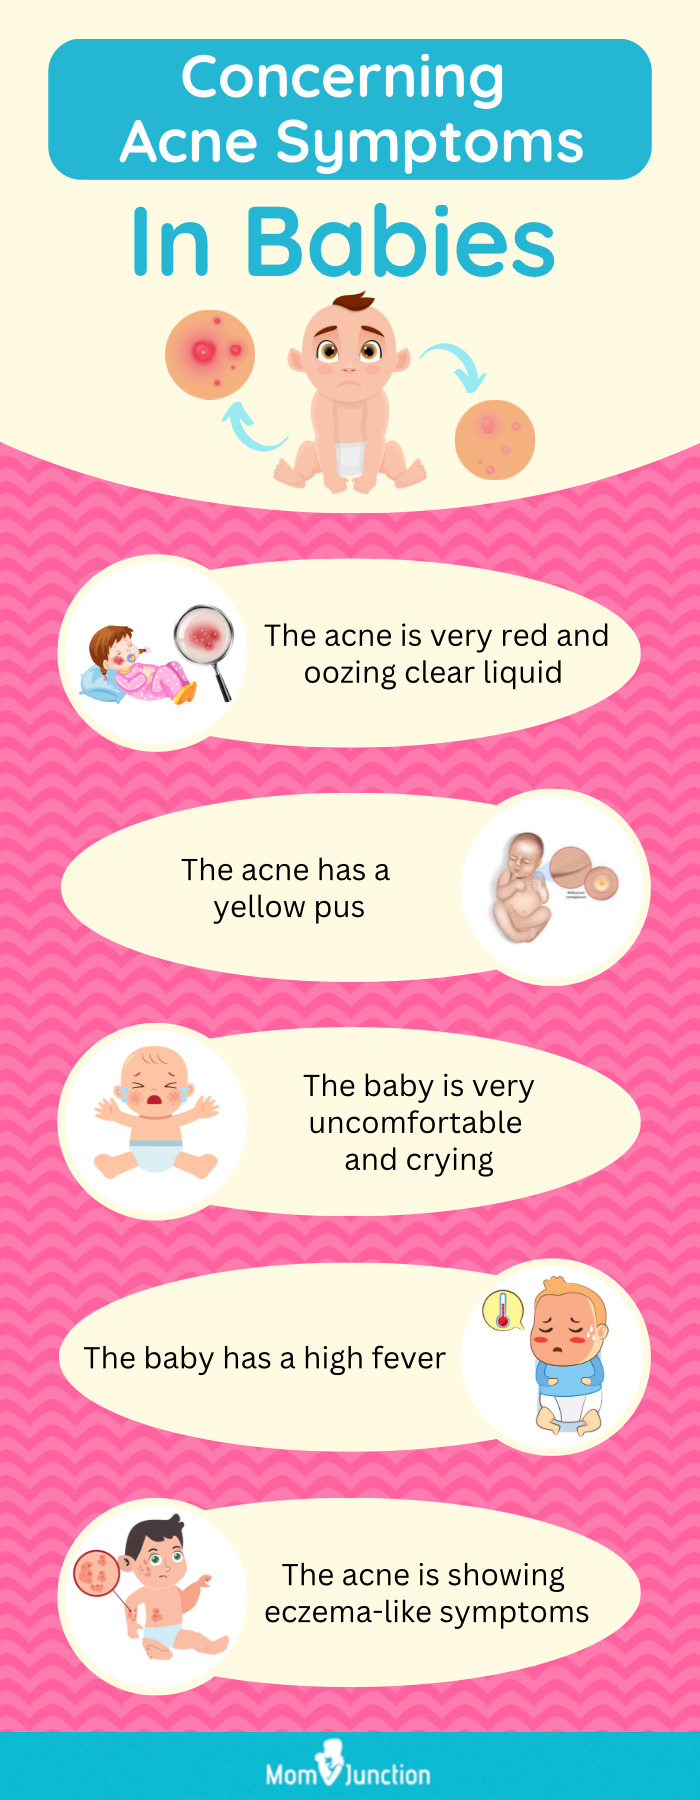 concerning acne symptoms in babies (infographic)